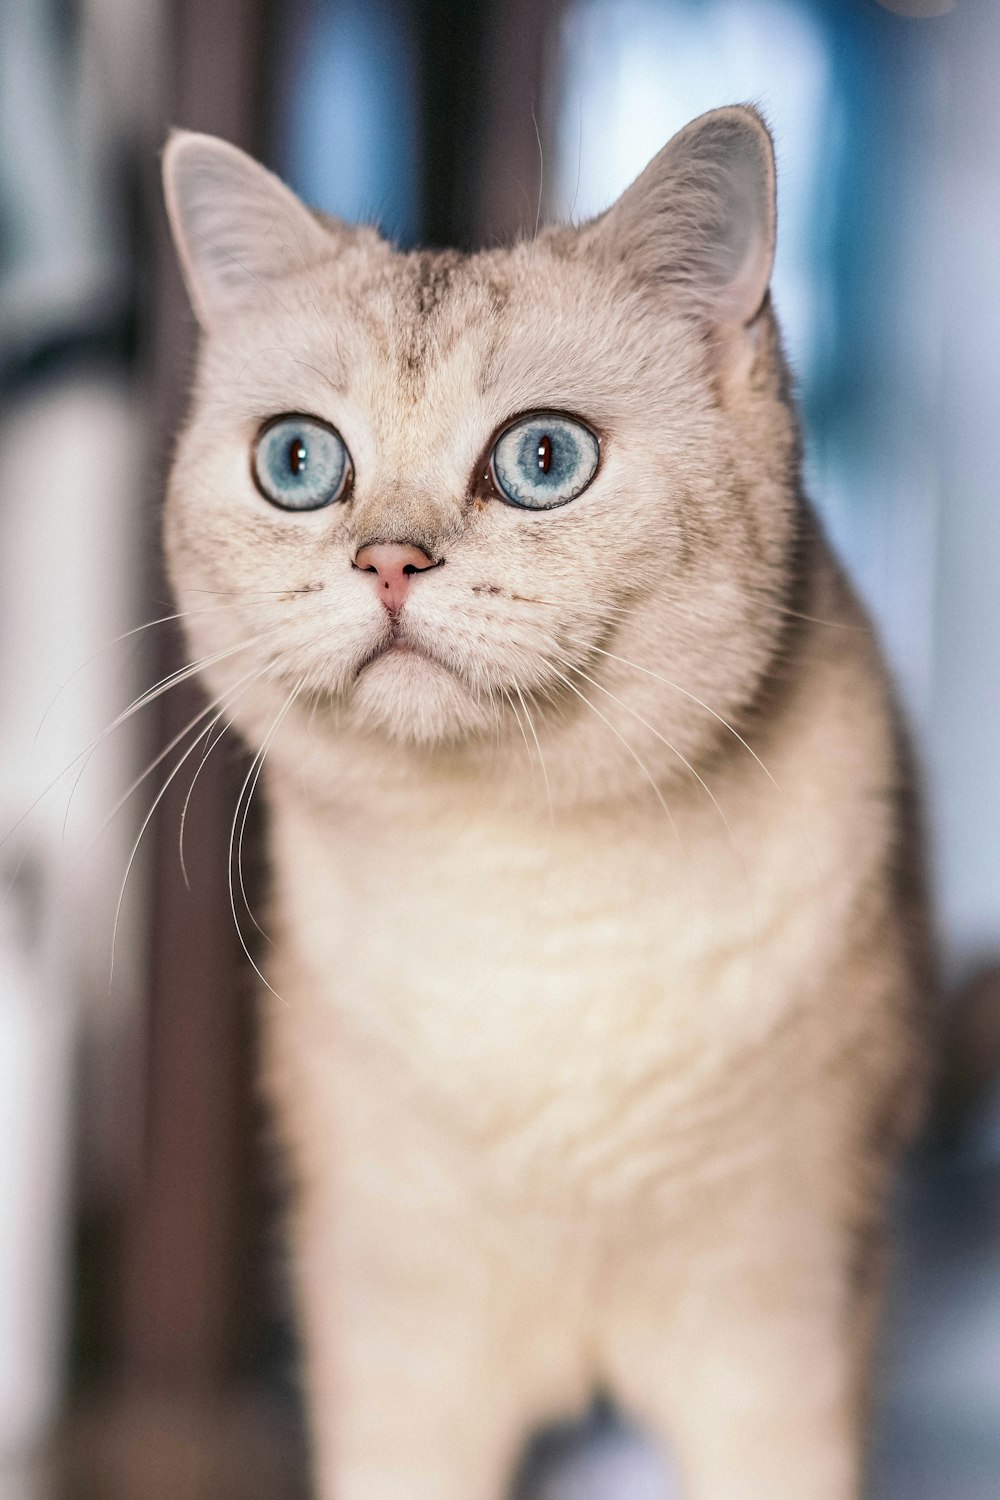 a white cat with blue eyes looking at the camera